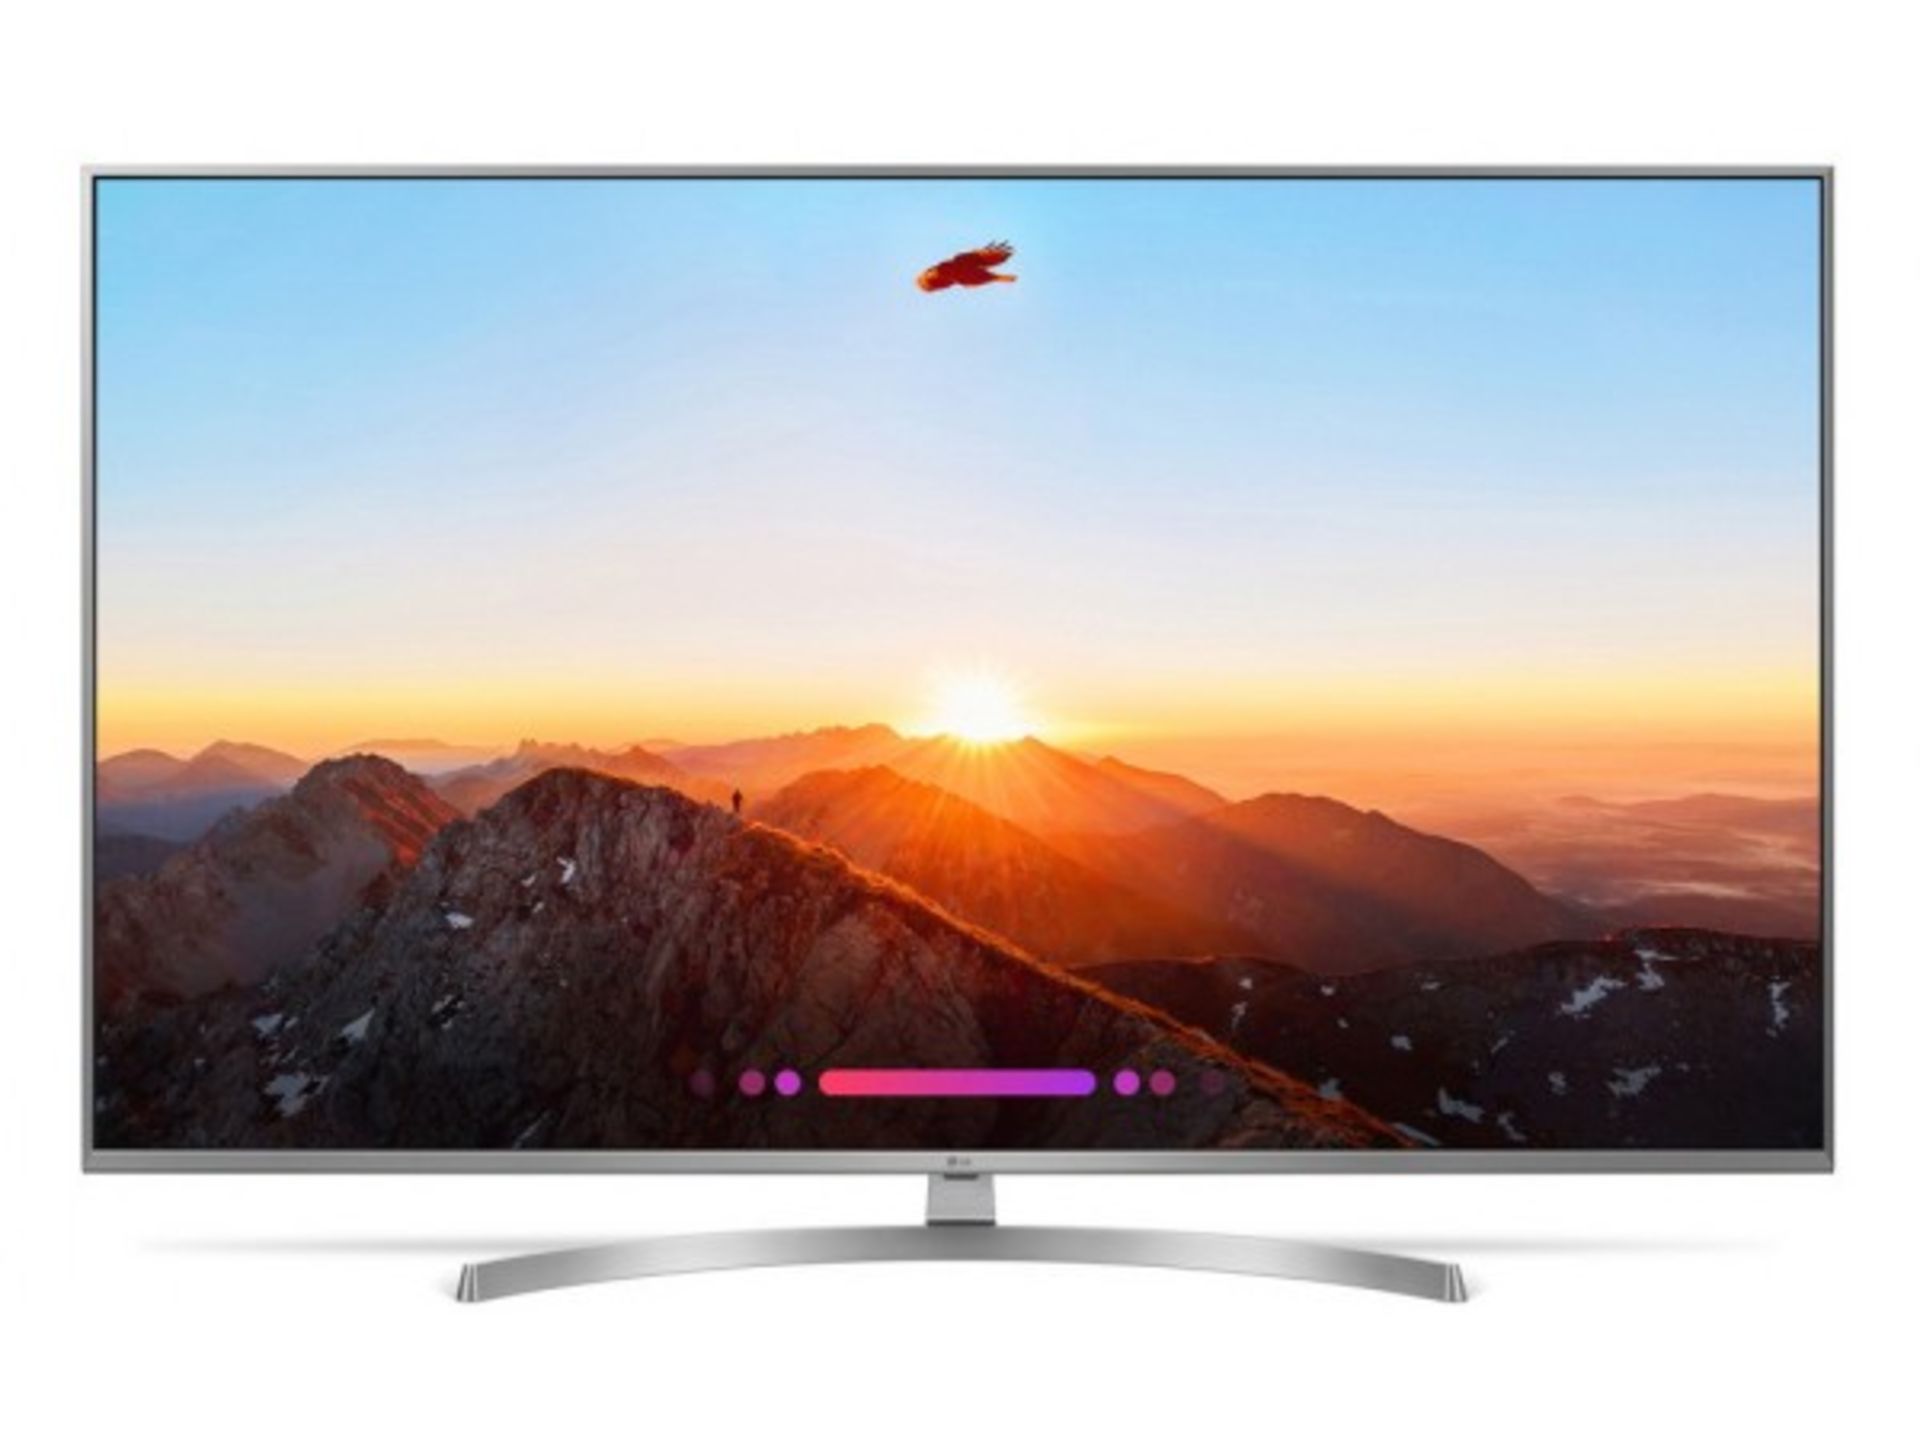 V Grade A LG 49 inch ACTIVE HDR 4K ULTRA HD LED SMART TV WITH FREEVIEW HD & WEBOS 4.0 & WIFI - AI TV